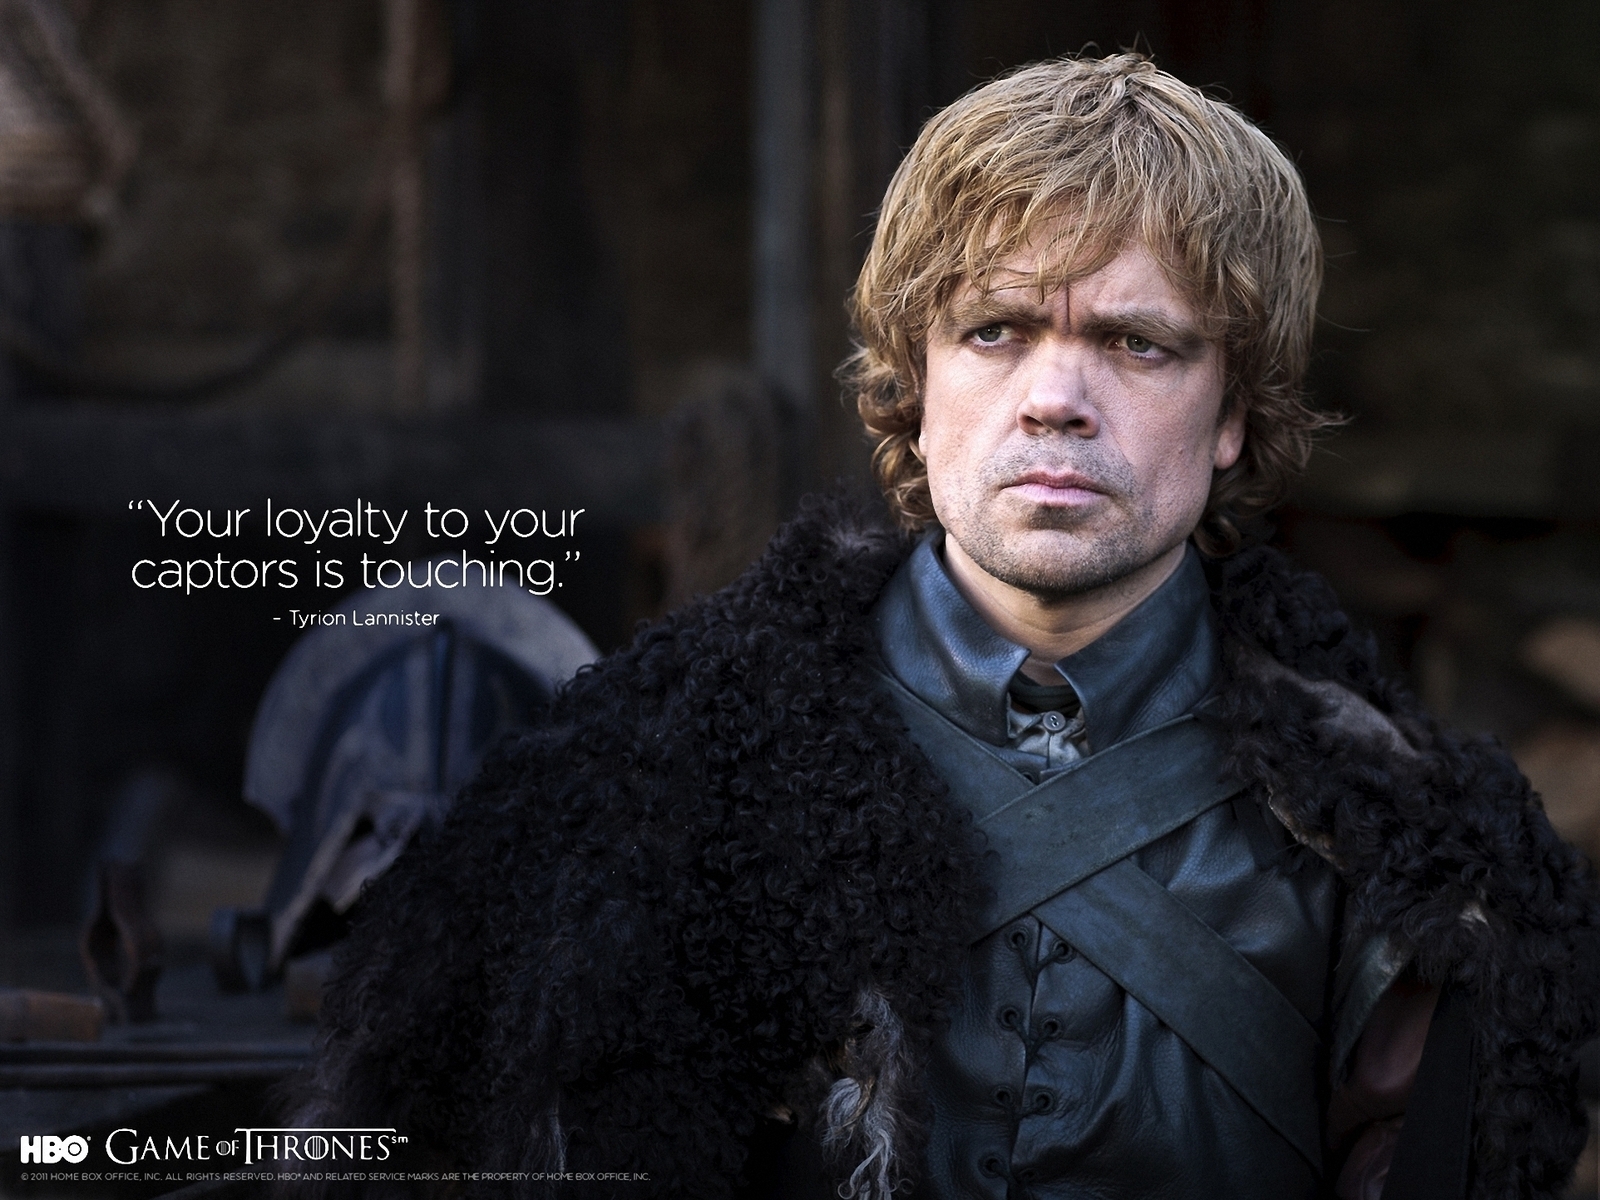 Tyrion Lannister Quote Game of Thrones for 1600 x 1200 resolution